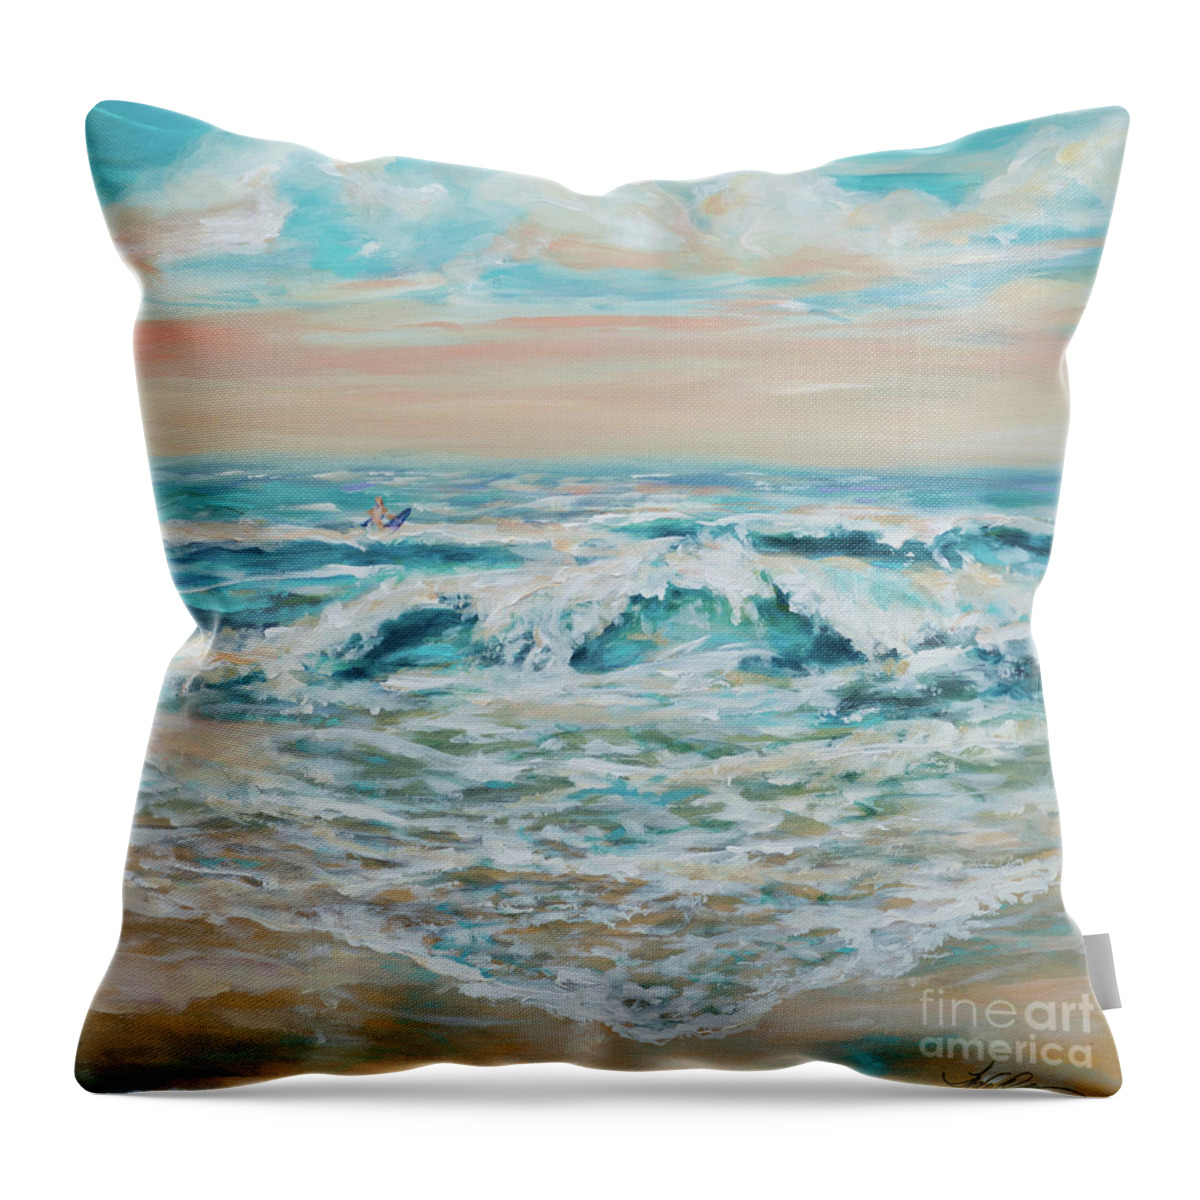 Surf Throw Pillow featuring the painting Summer Surf by Linda Olsen